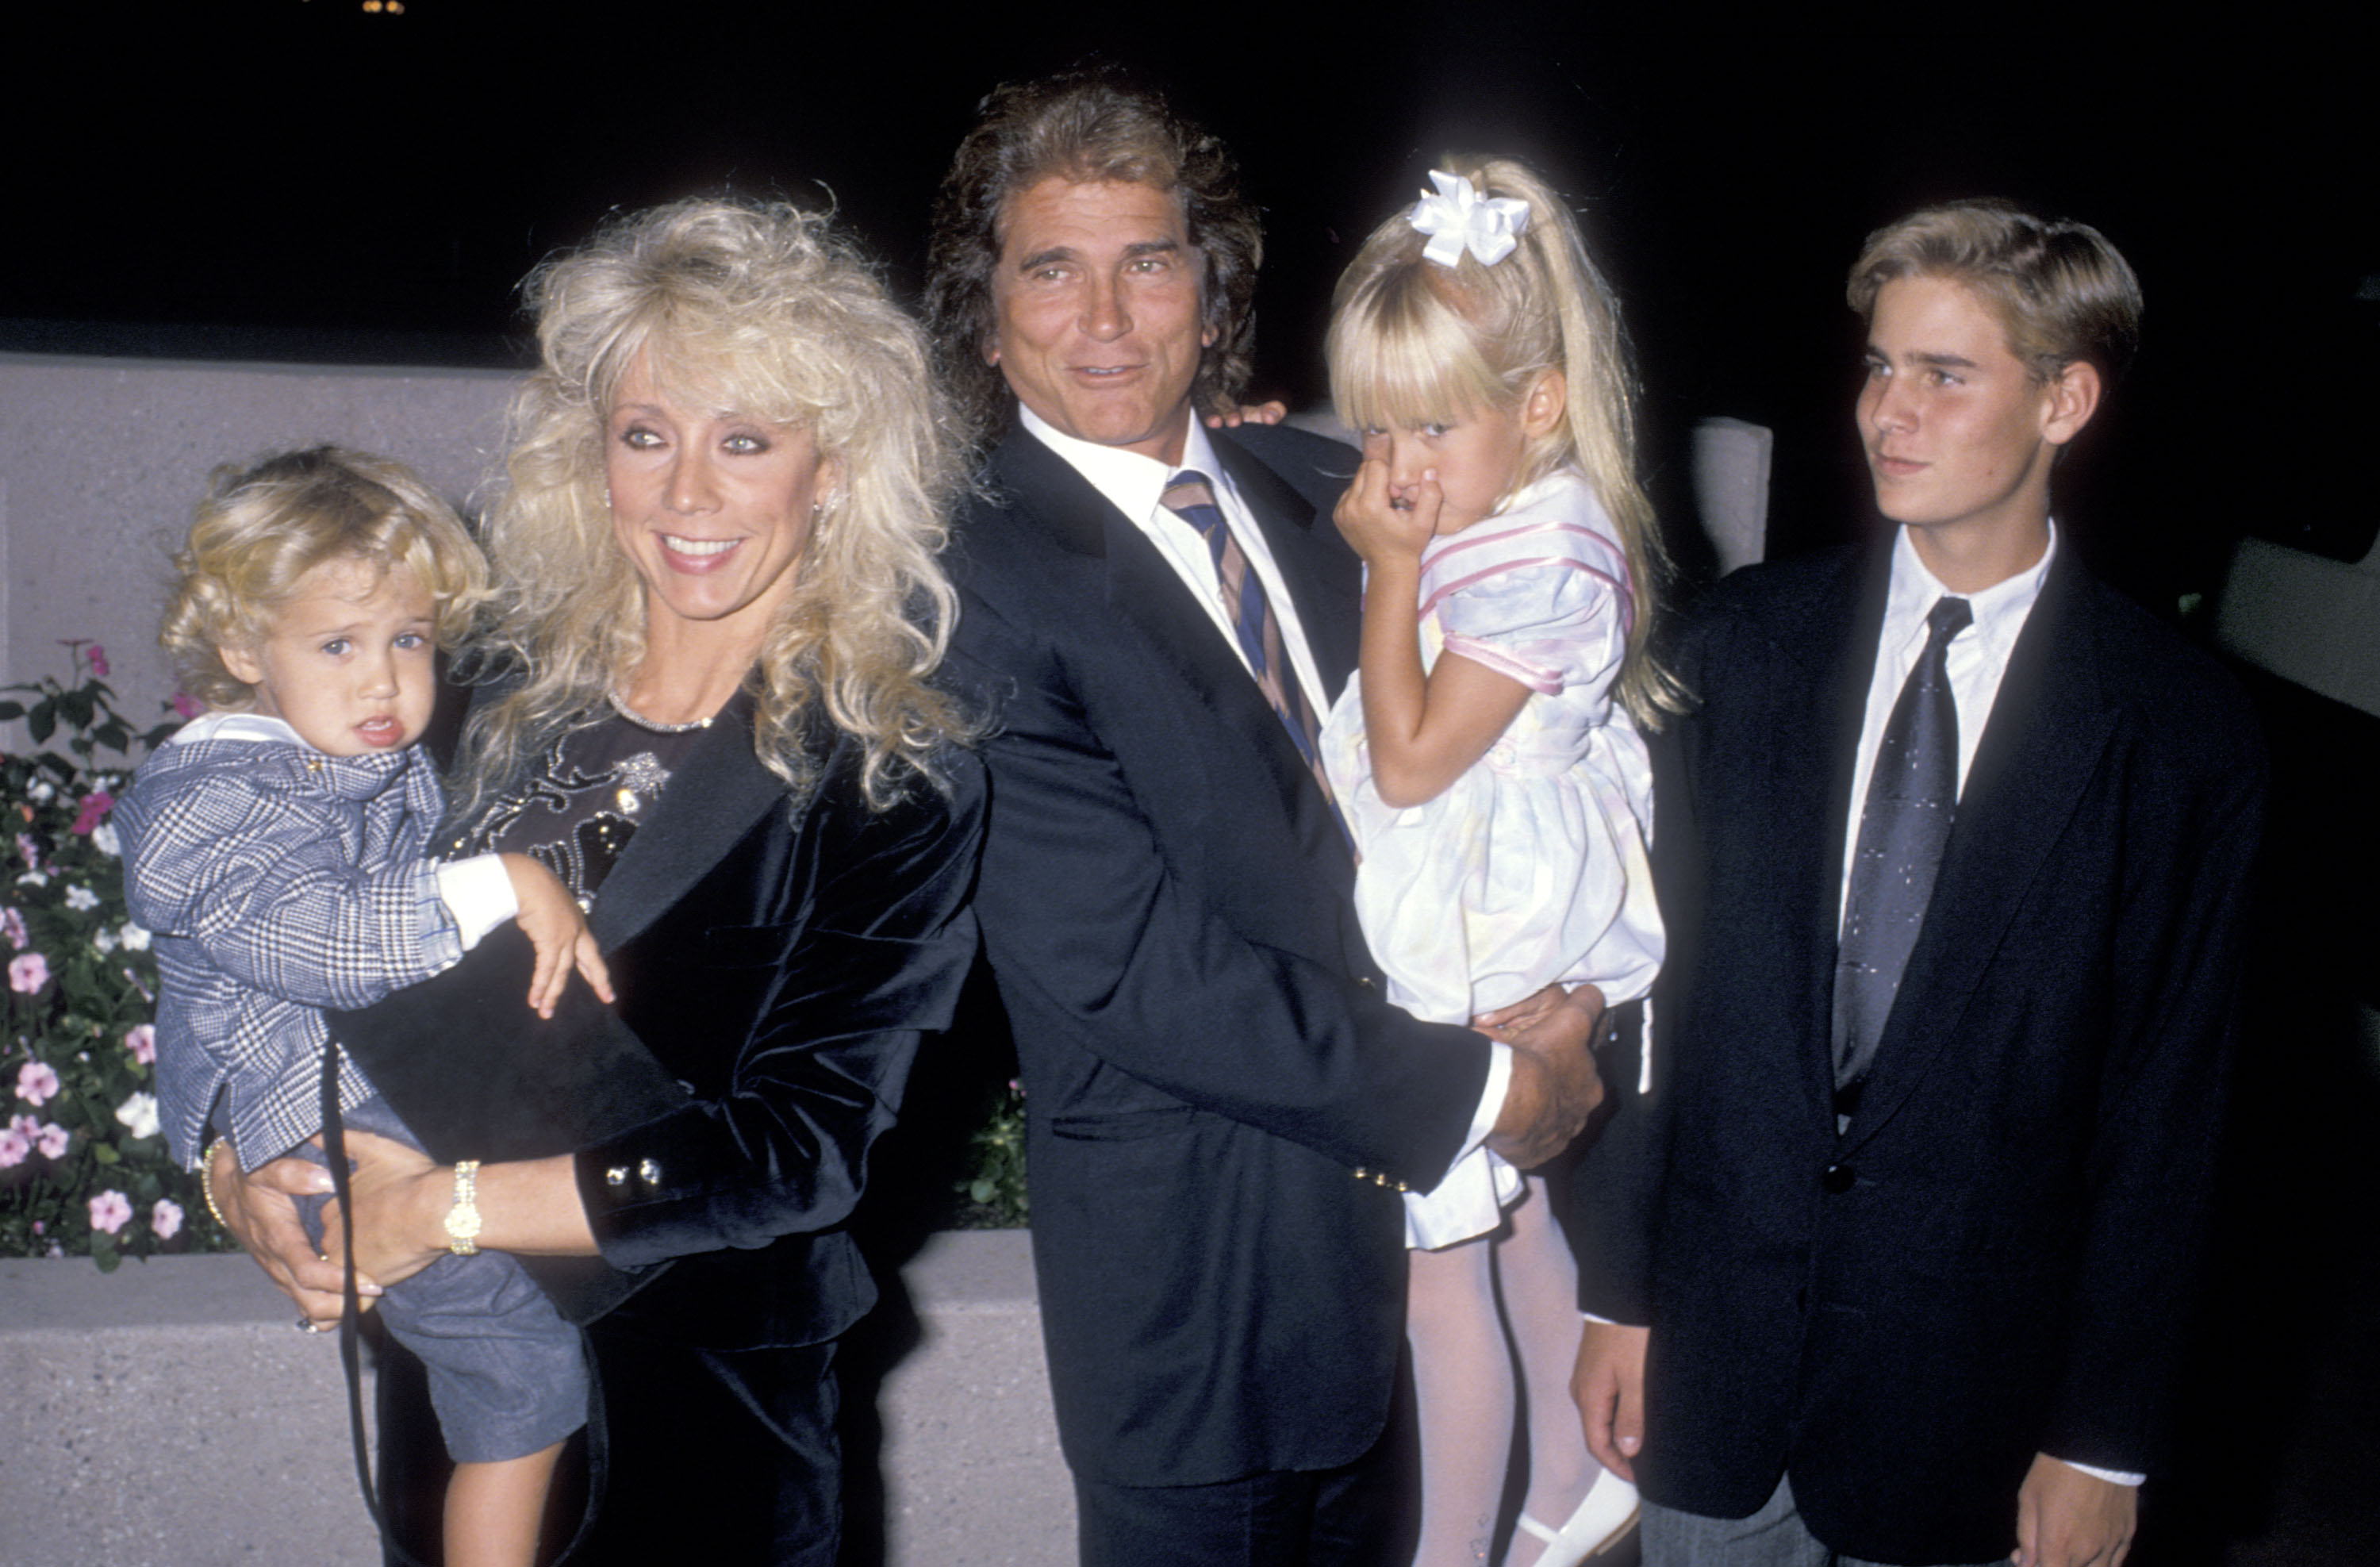 (L-R) Sean Landon, Cindy Landonm Michael Landon, Jennifer Landon, and Christopher Landon, are photographed at the National Down Syndrome Congress' Second Annual Michael Landon Celebrity Gala on October 15, 1988, at Filmland Center in Culver City, California | Source: Getty Images